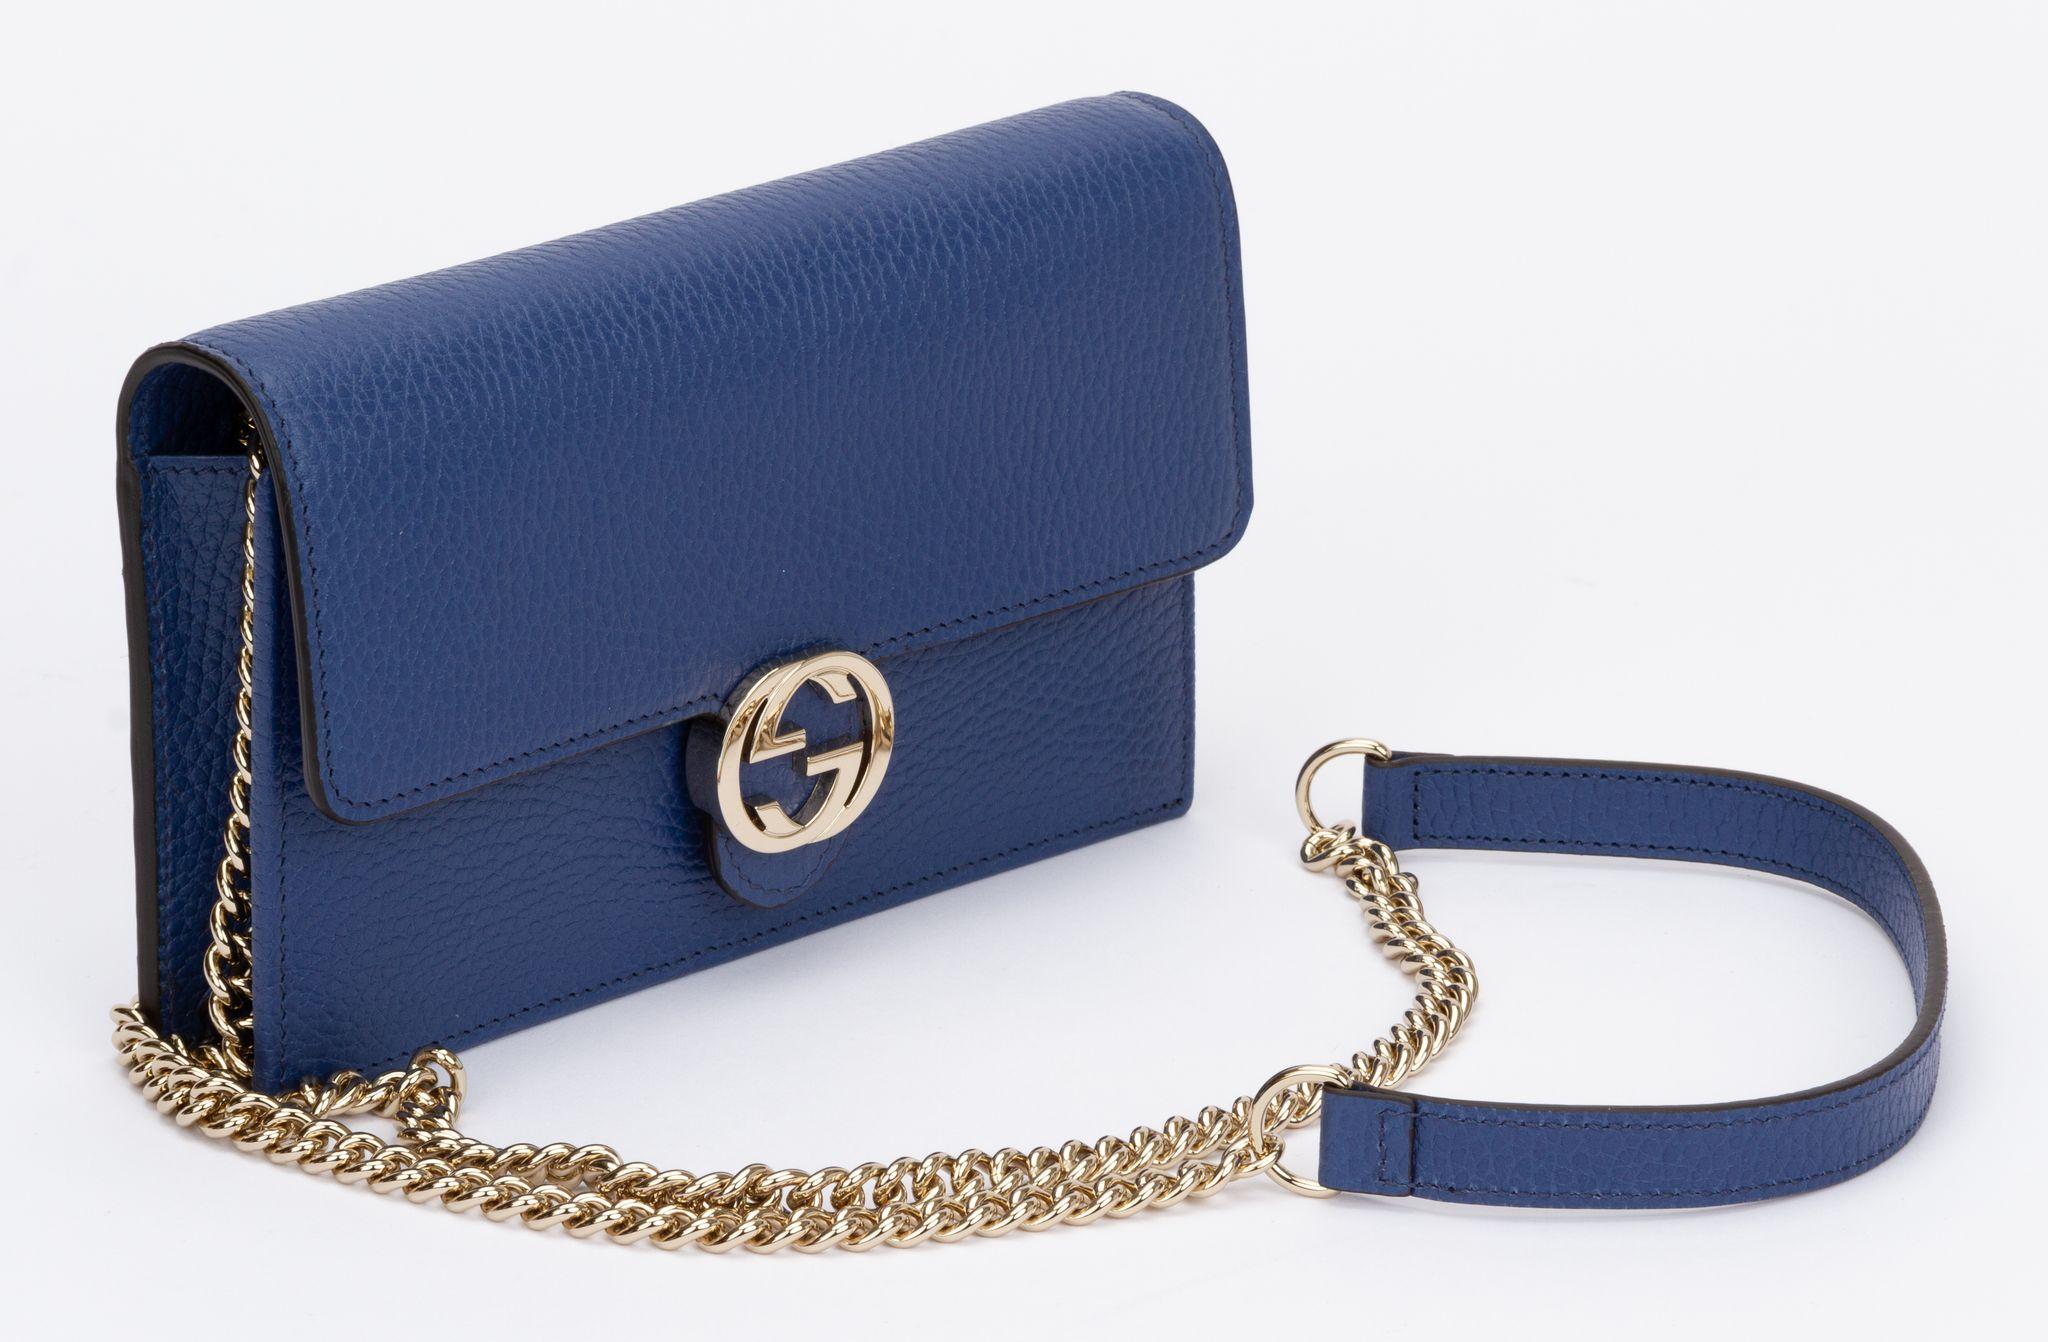 Gucci new in box blue hammered leather cross body bag with light gold tone hardware. Shoulder strap drop 23.5